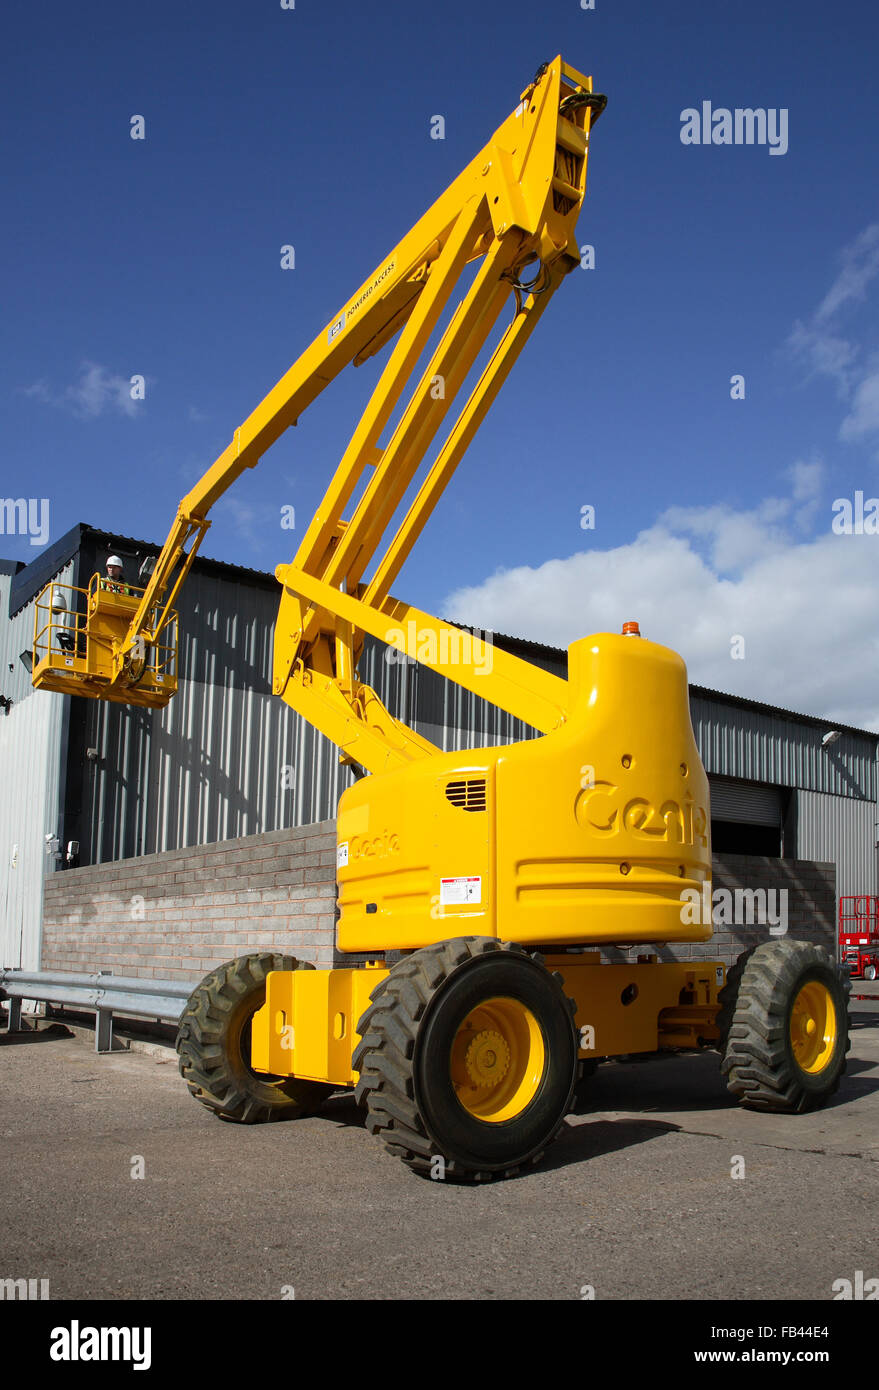 A Genie, diesel-powered, hydraulic access platform is used to access the exterior of a warehouse building Stock Photo